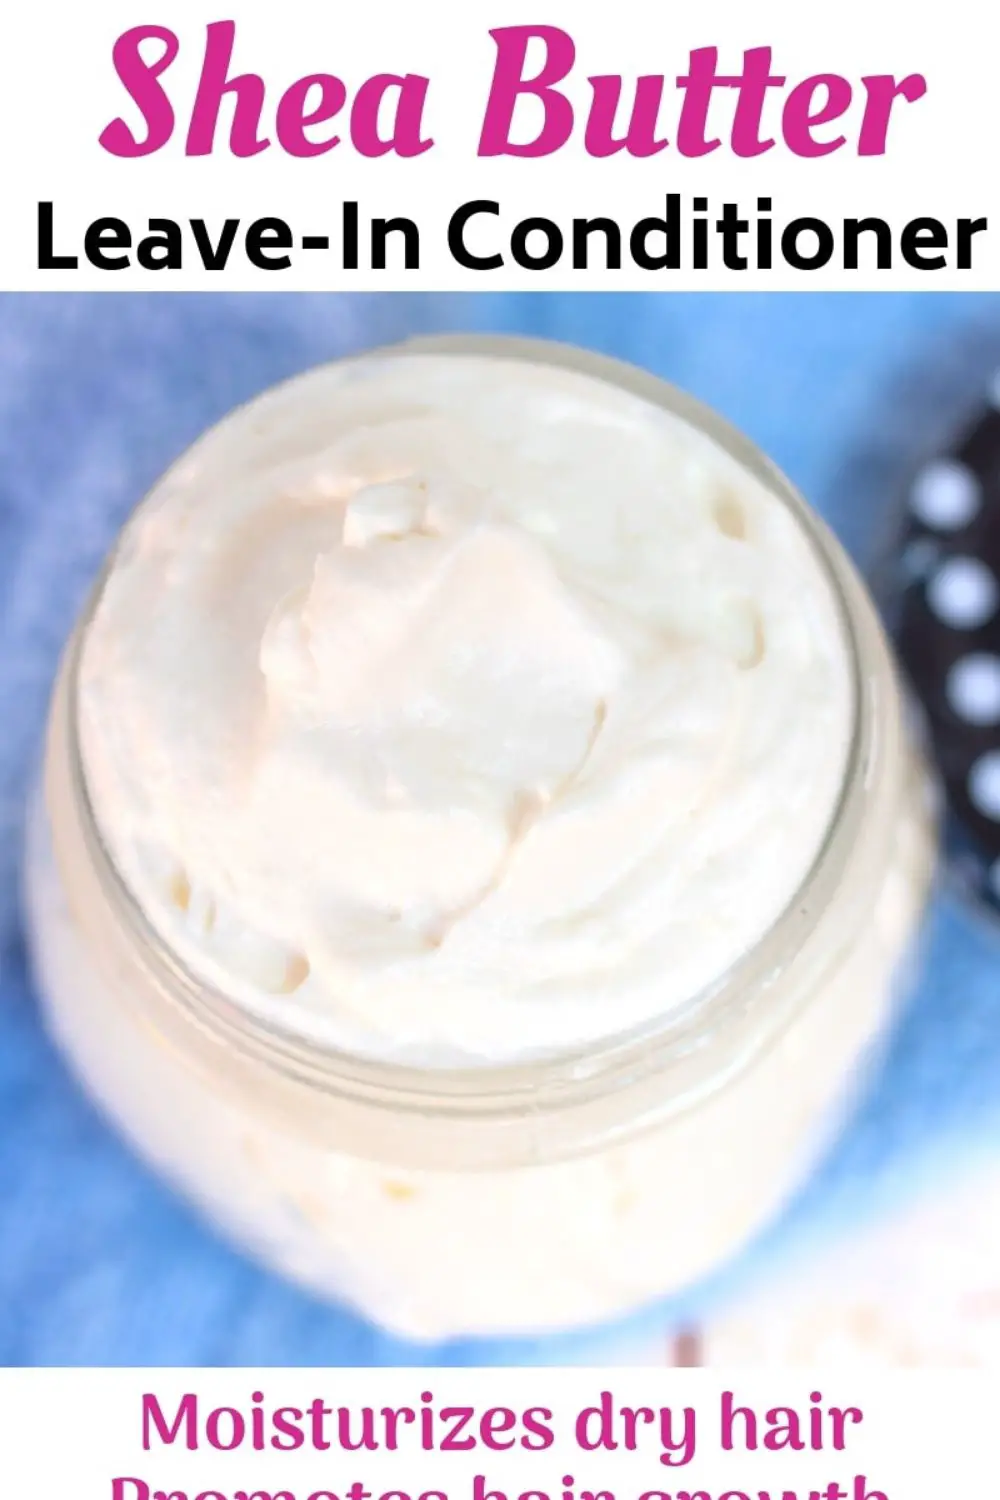 shea butter hair conditioner recipes